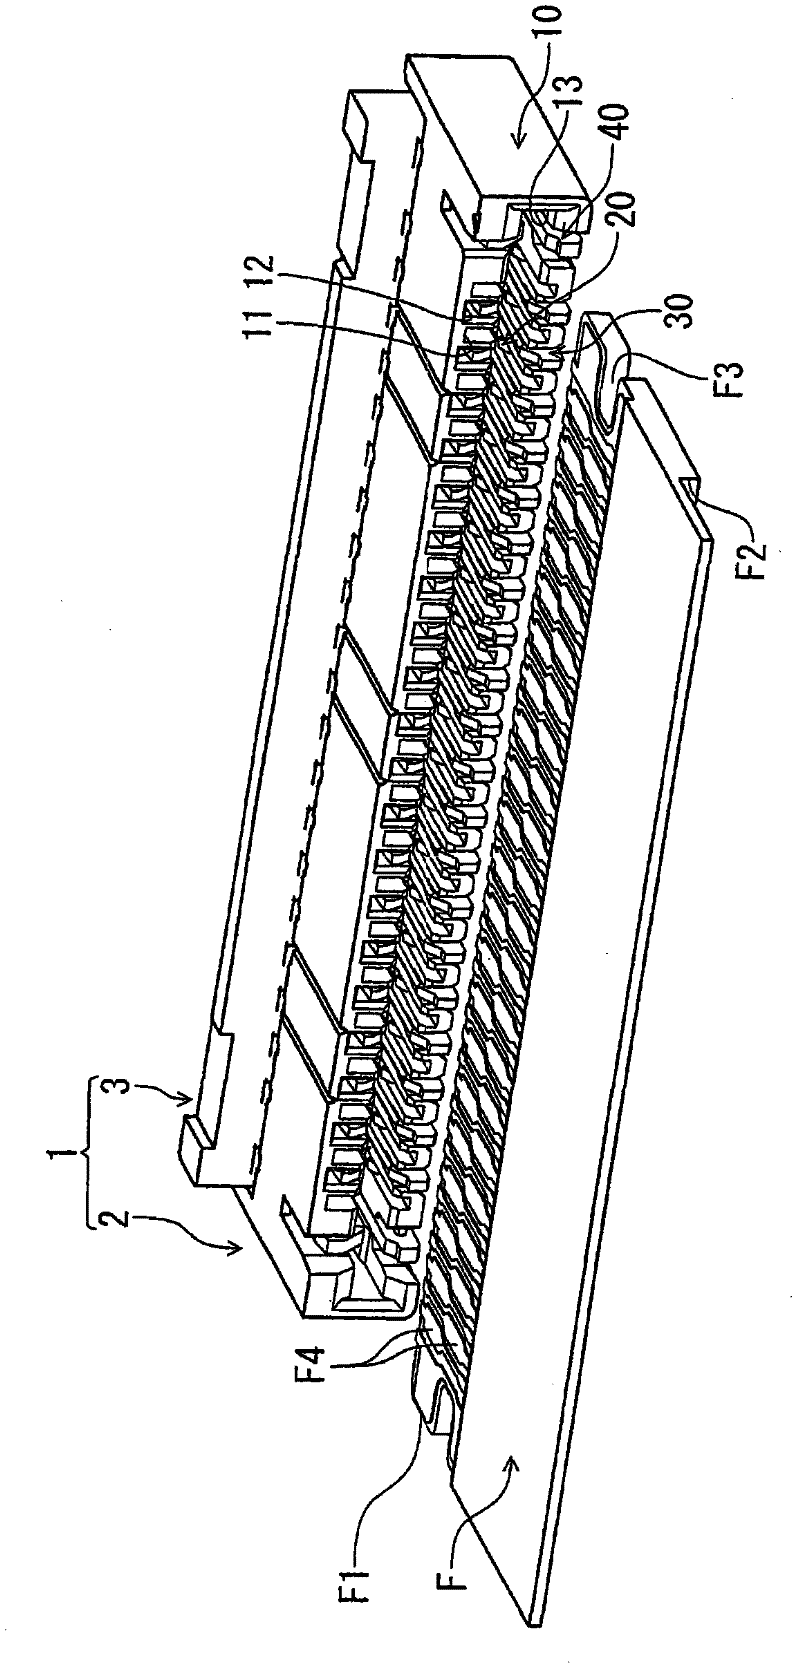 Electric connector for flat conductor